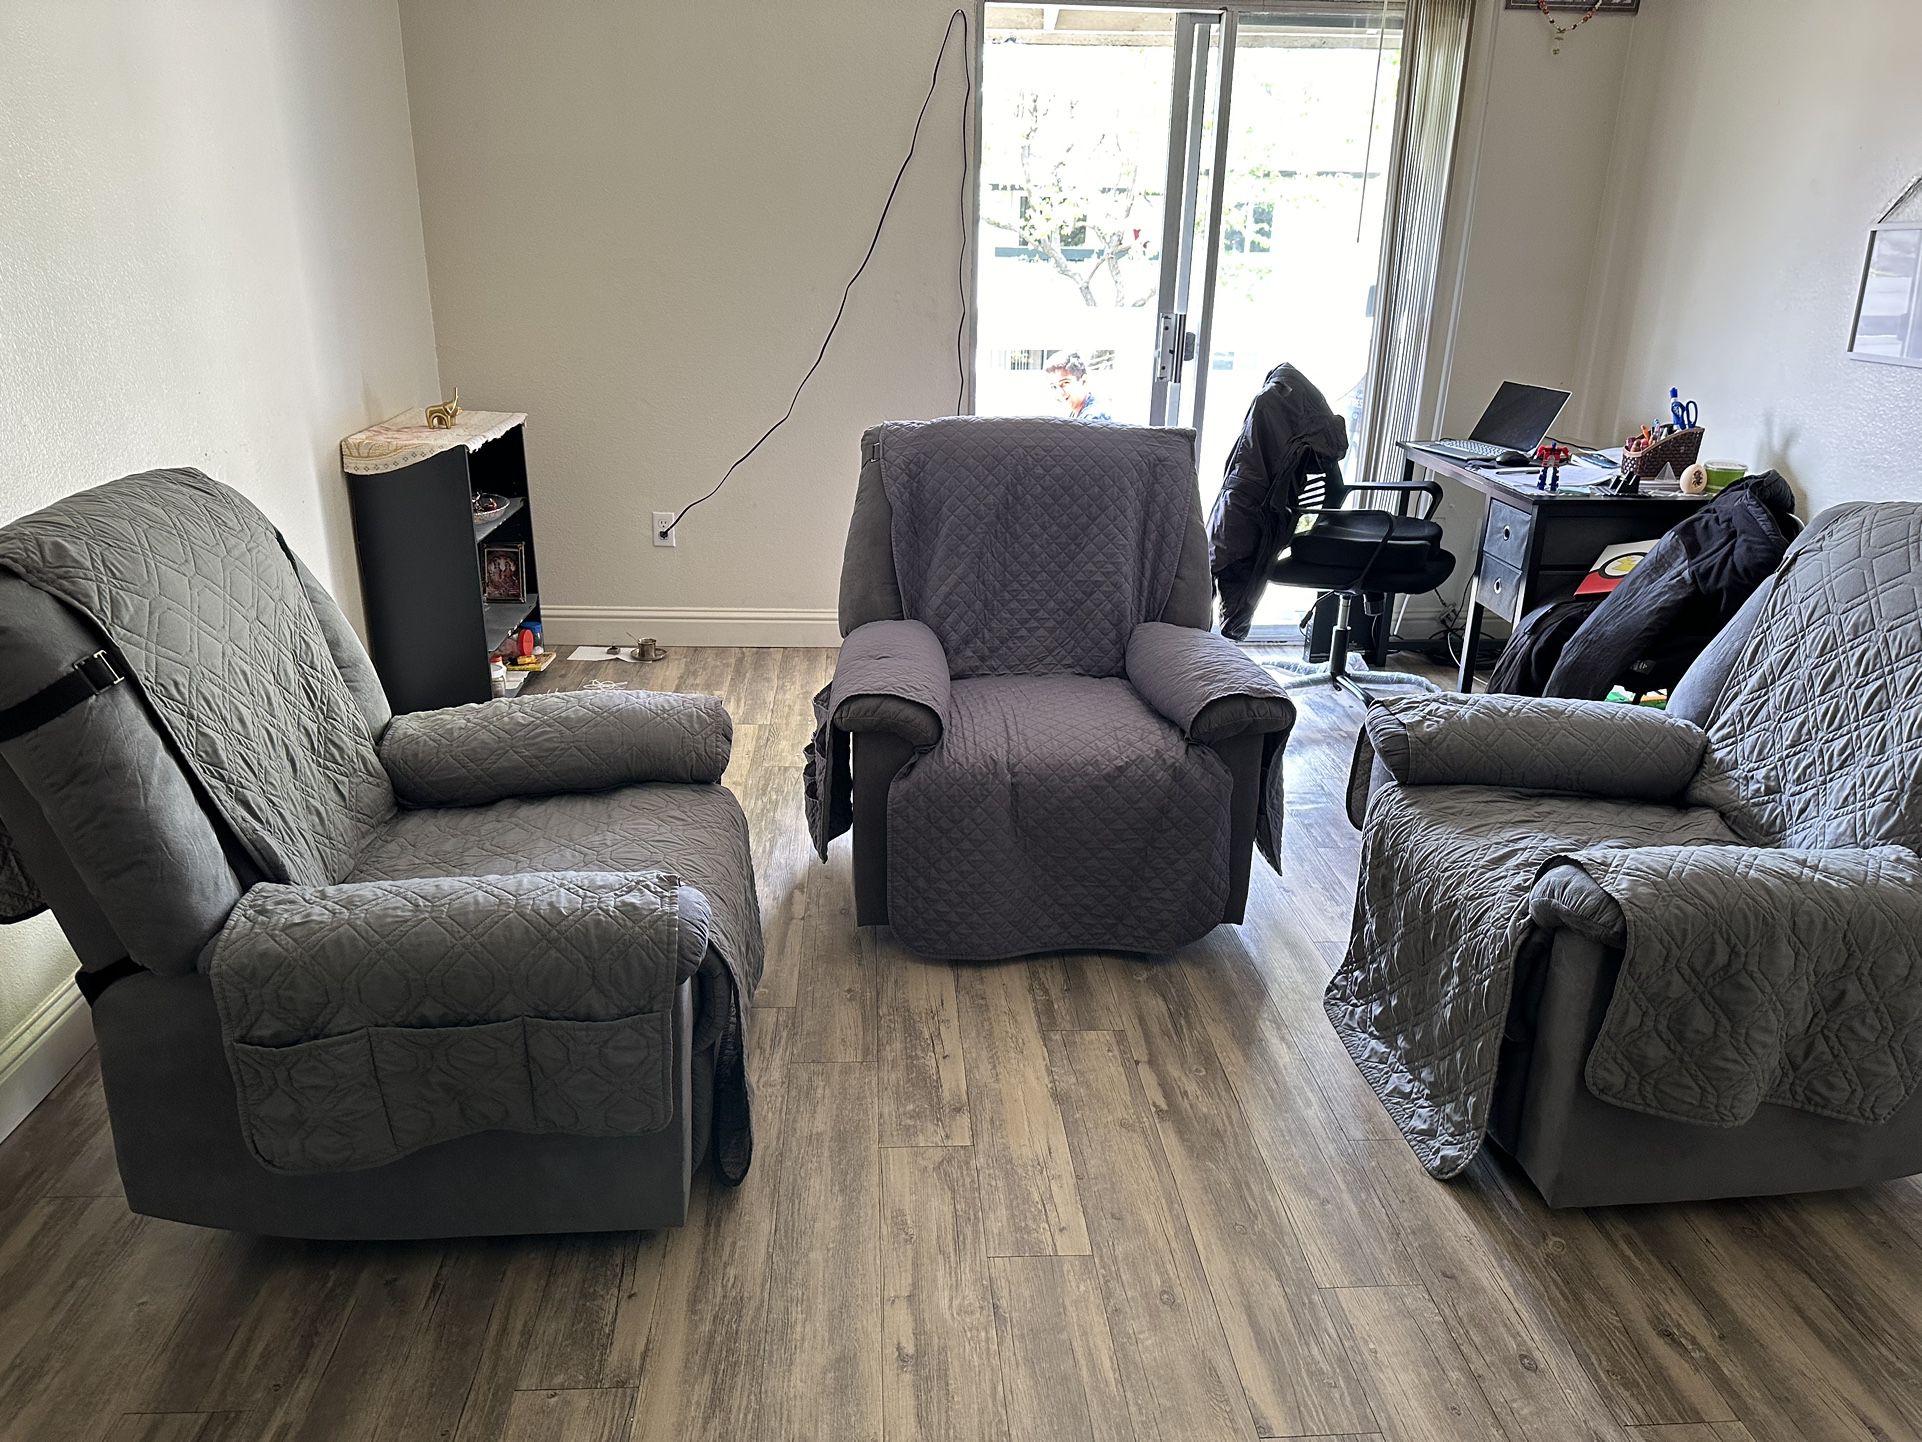 3 - Classic Manual Recliner Chairs for sale